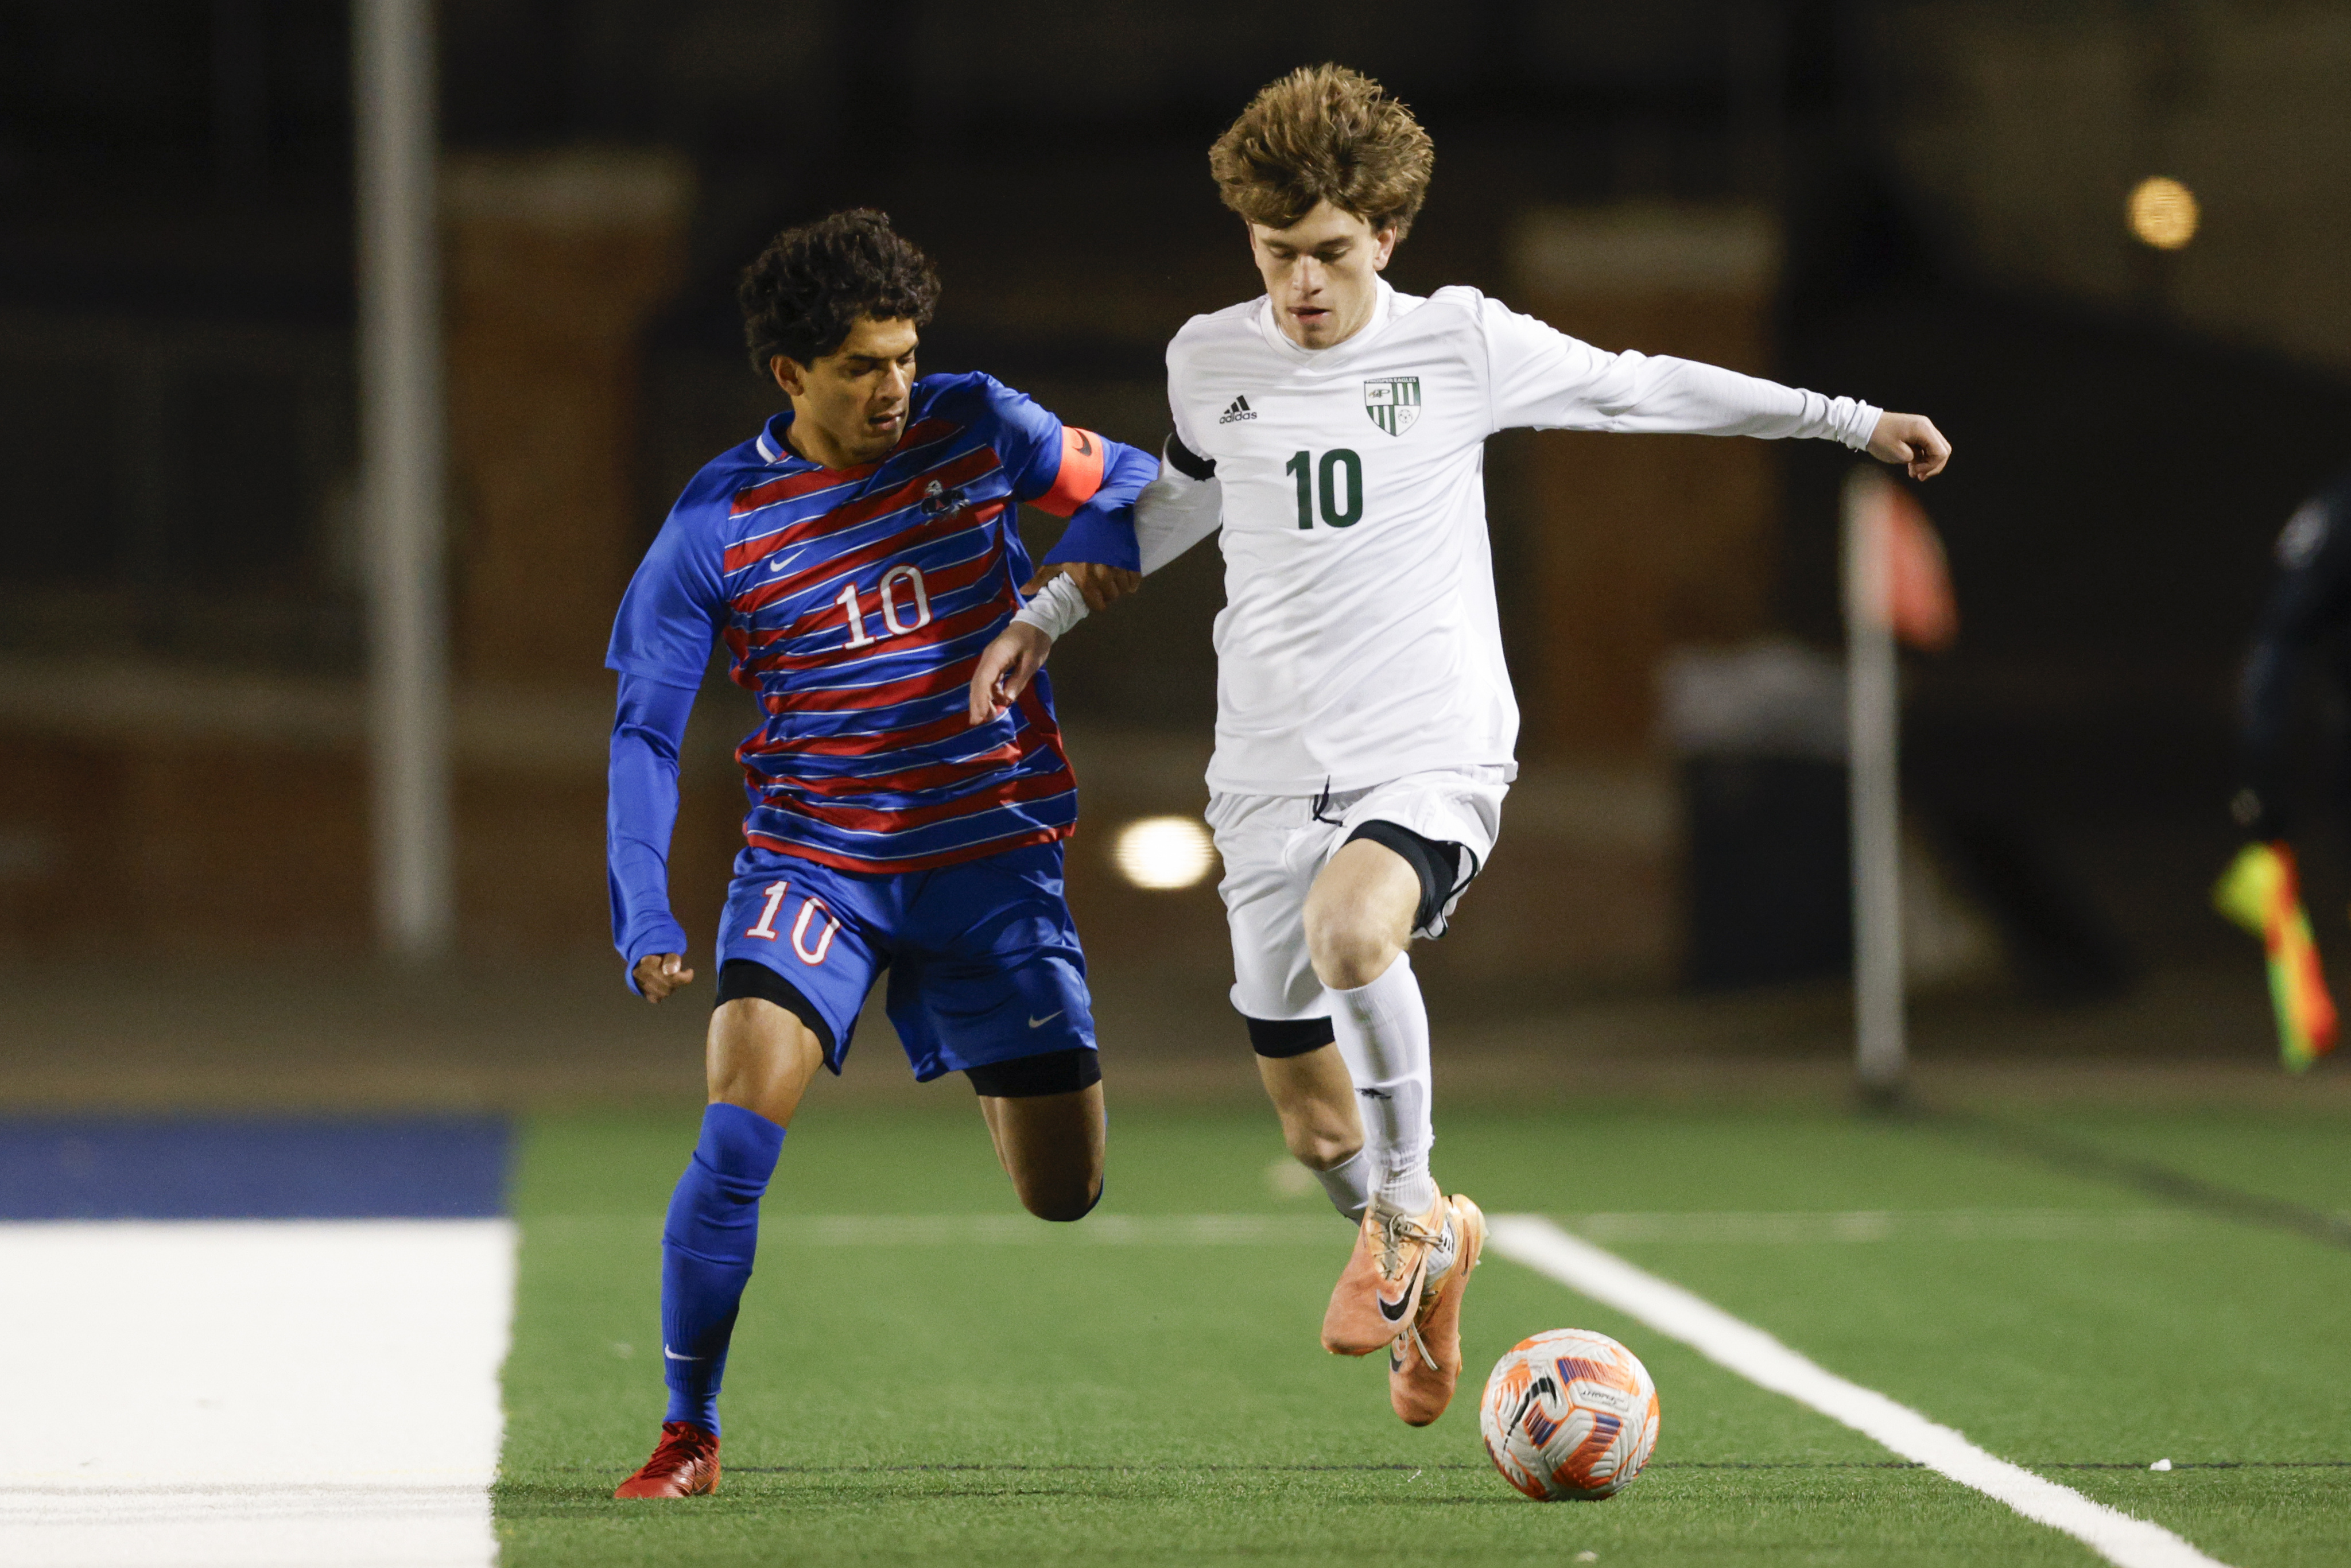 Prosper’s Caden Berg (right) pushes the ball down the field as Allen’s Zayan Ahmed (10)...